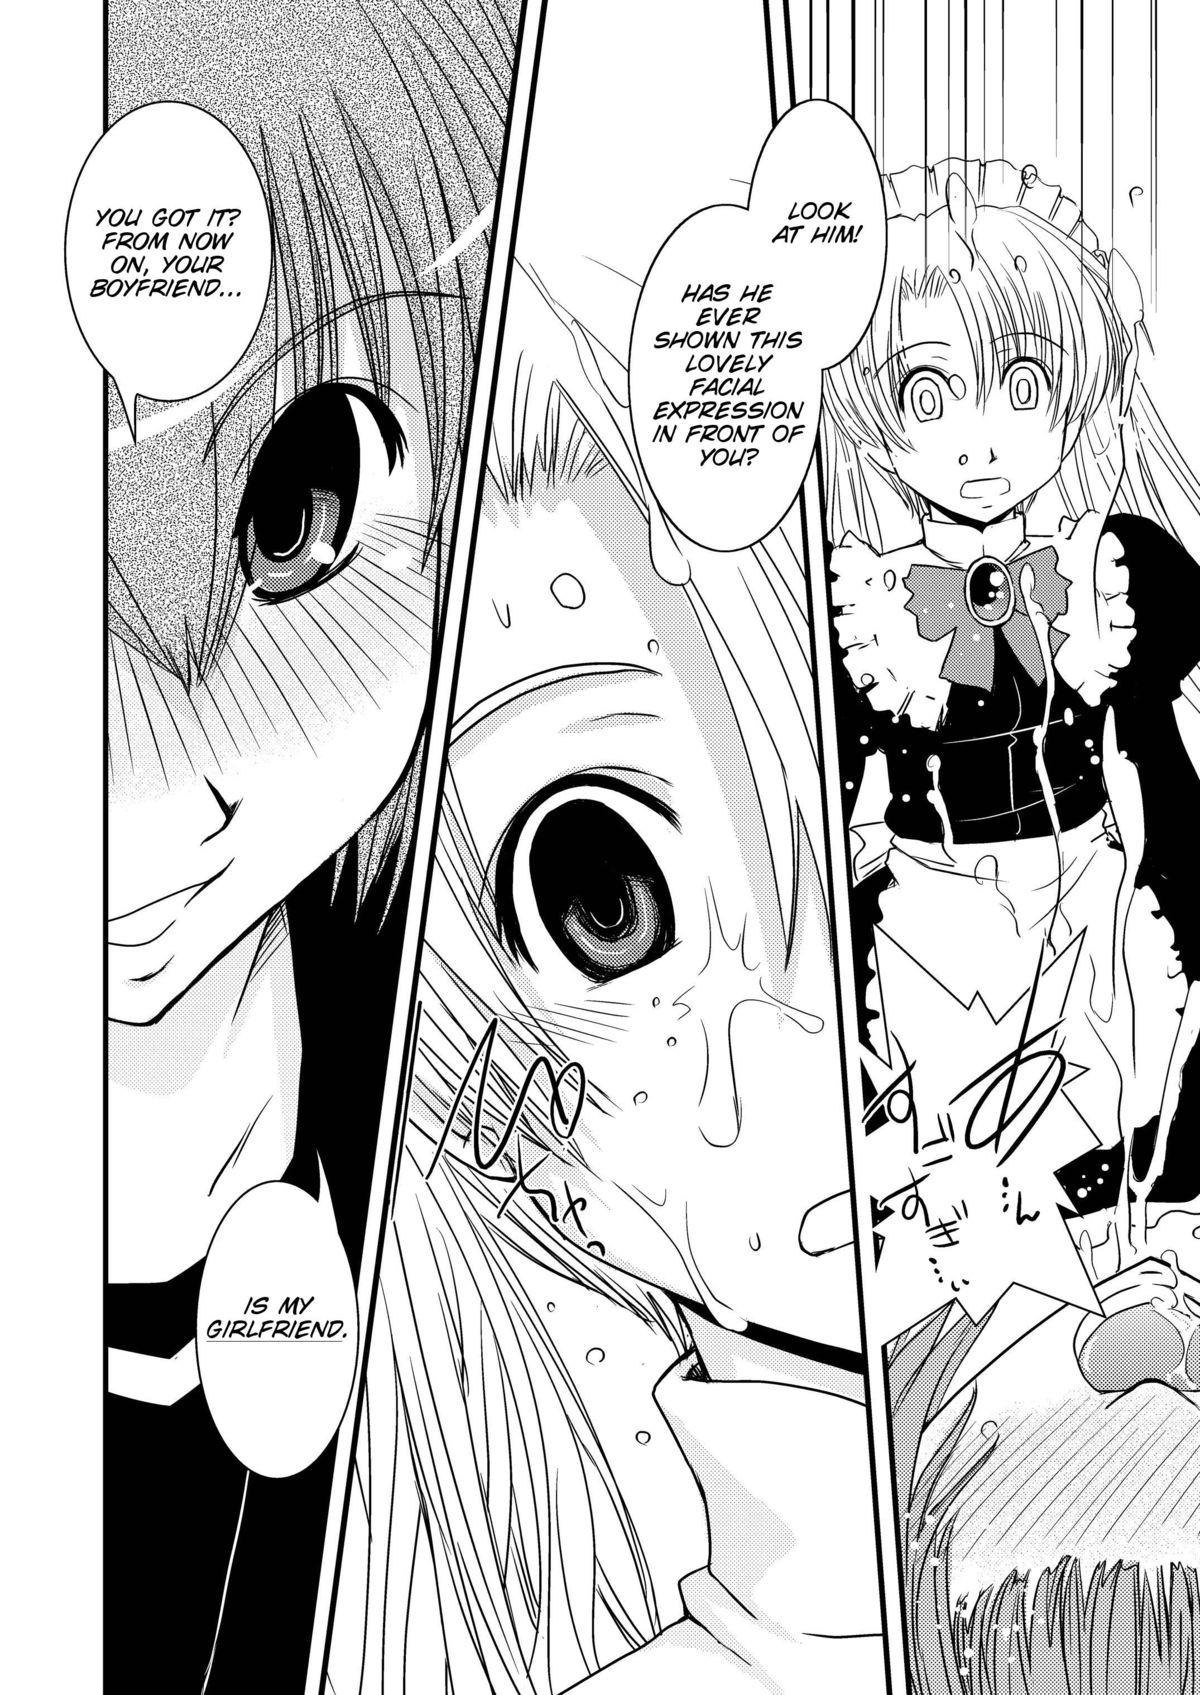 Blows CROSSxDRESS Afters Ch. 1 Home - Page 29